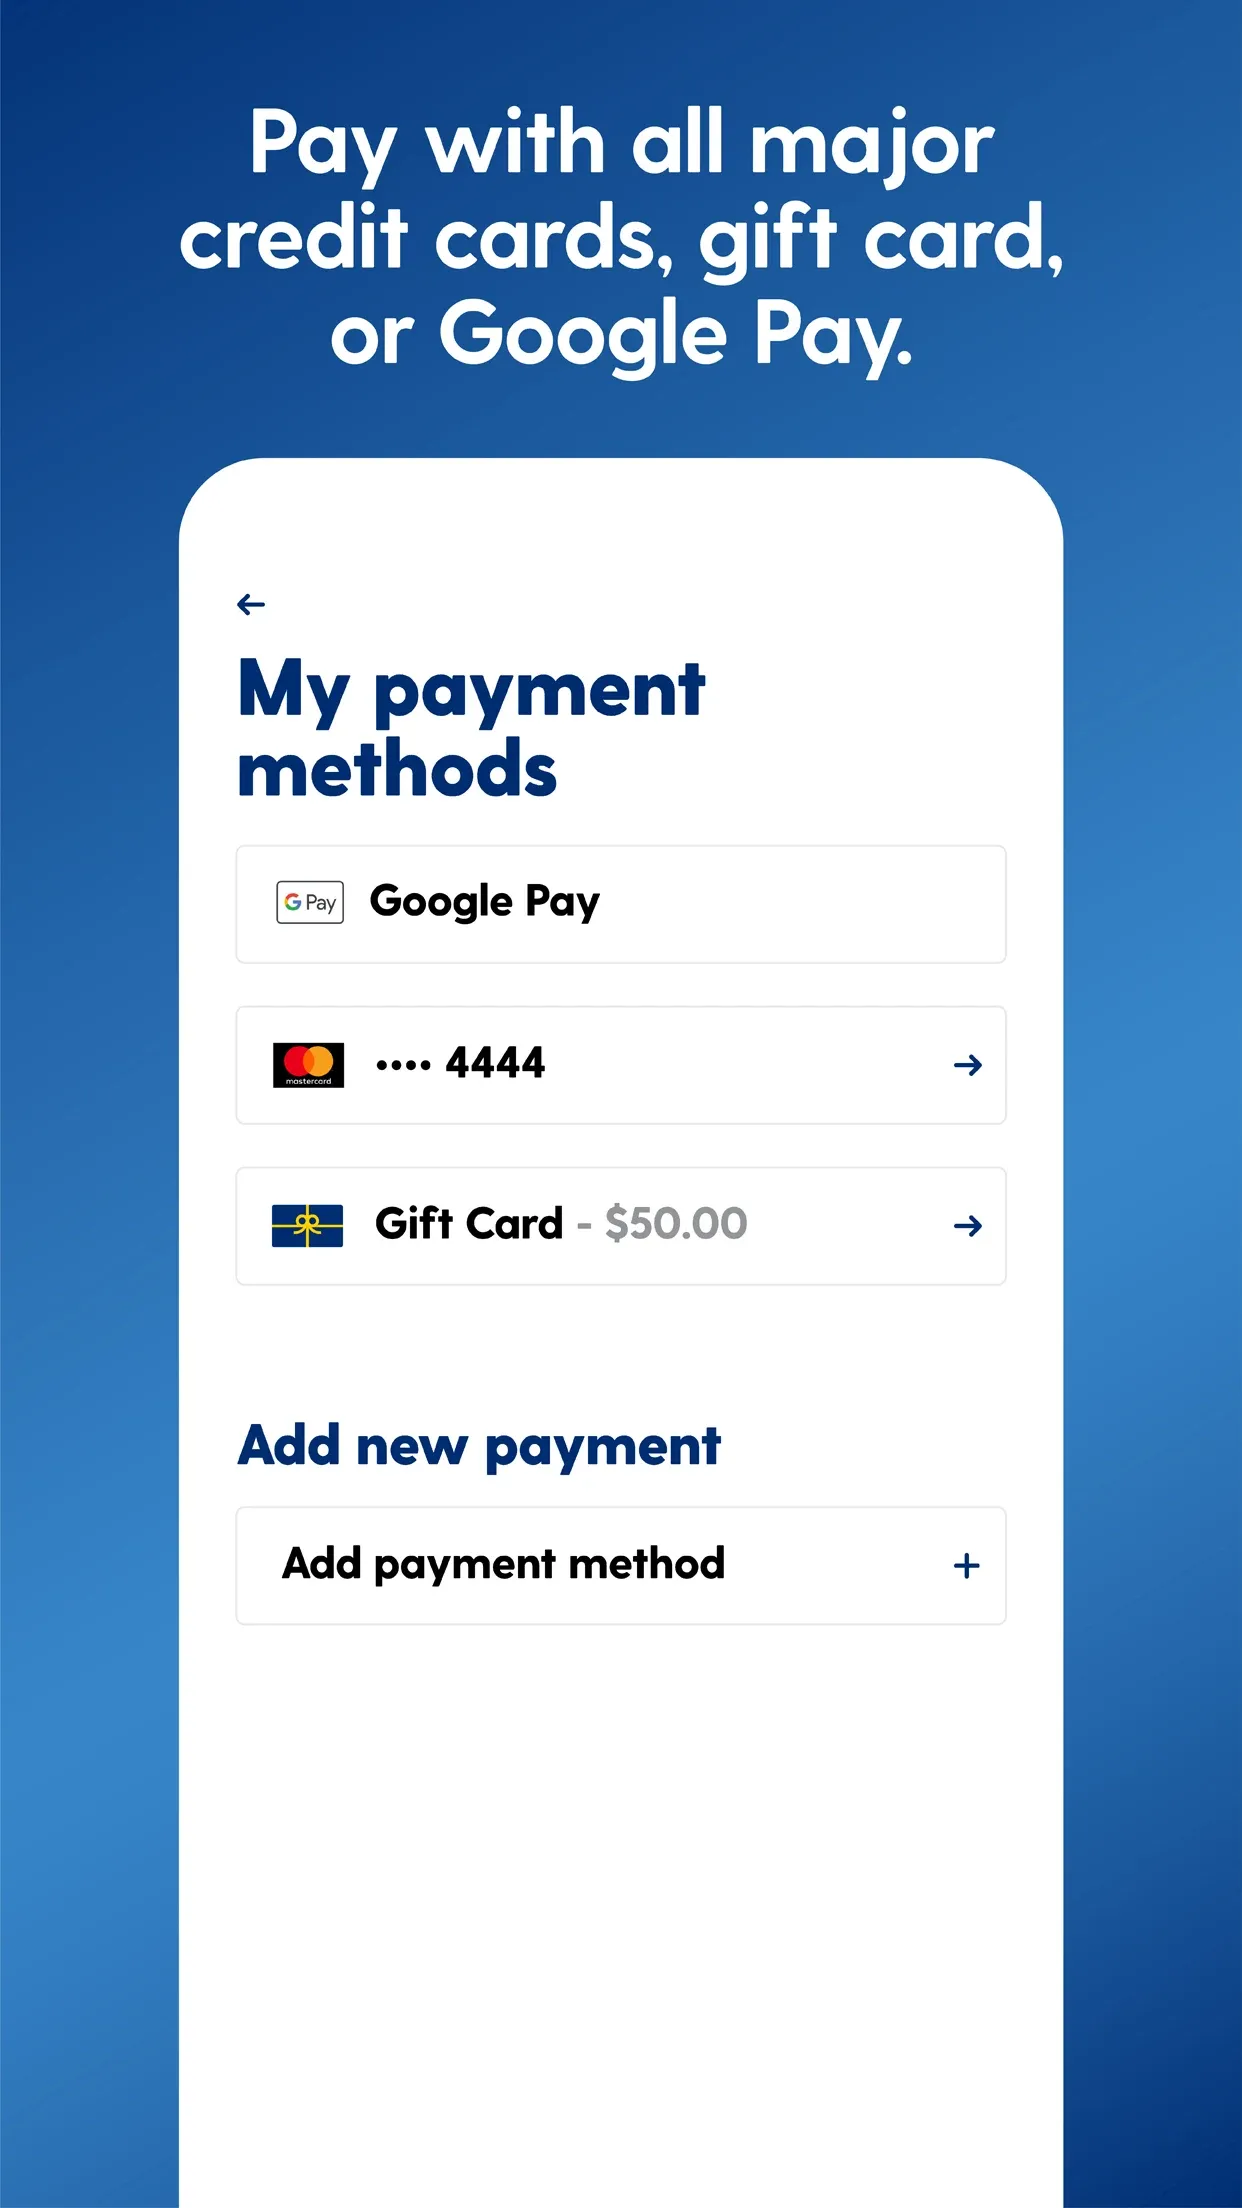 The saved payment methods in the Sunoco app